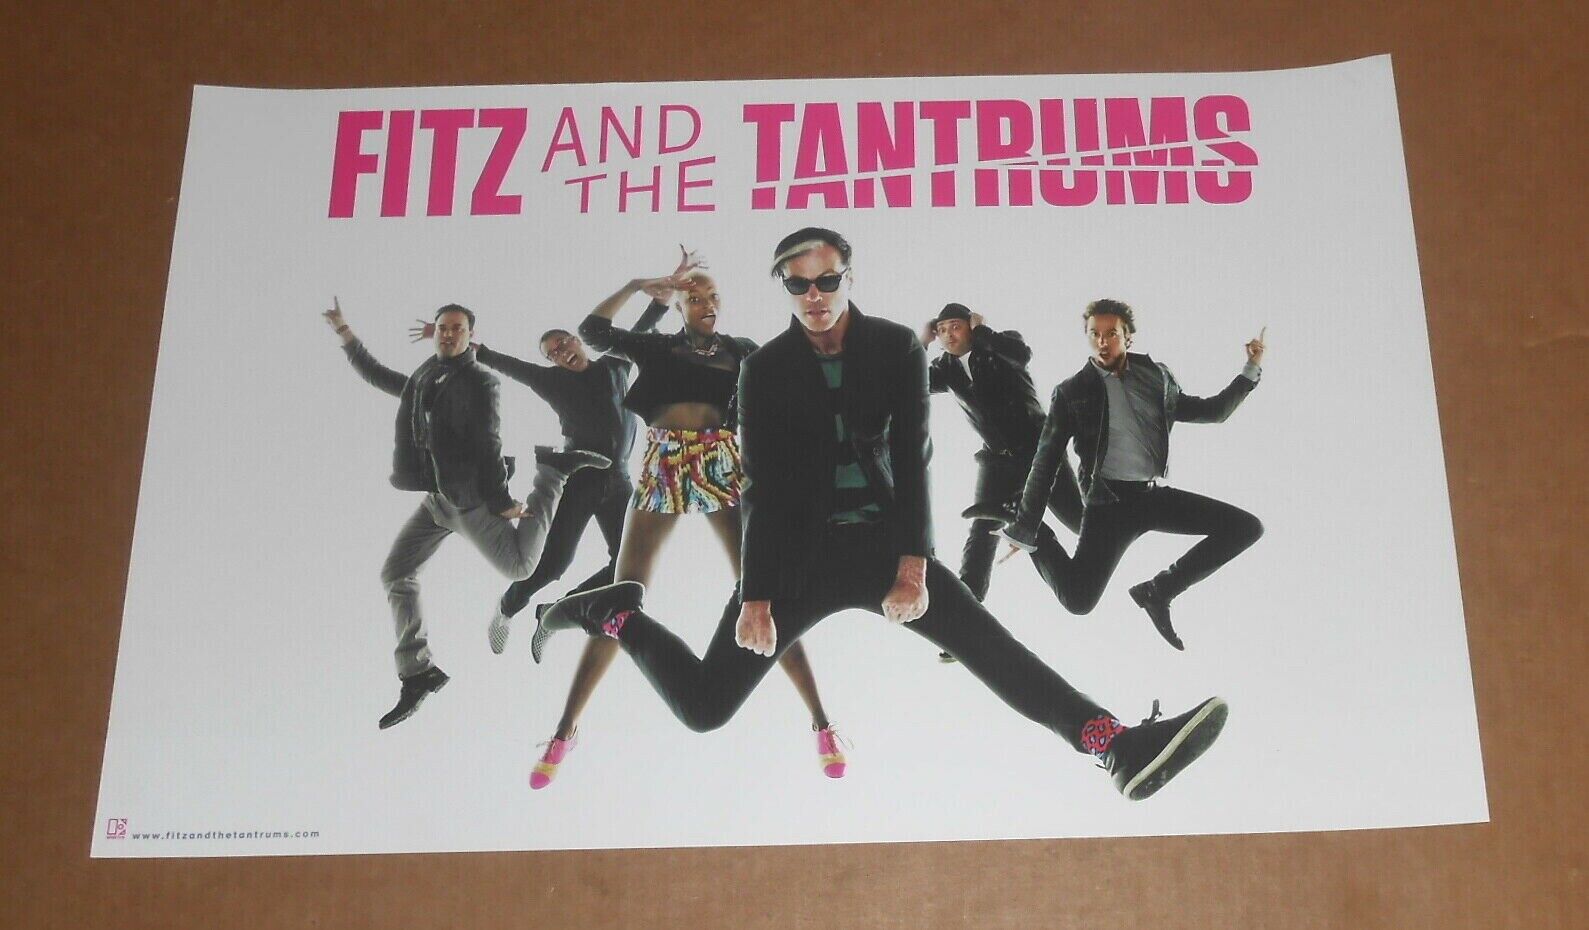 Fitz and the San Charlotte Mall Diego Mall Tantrums Poster 11x17 2-Sided Original Promo